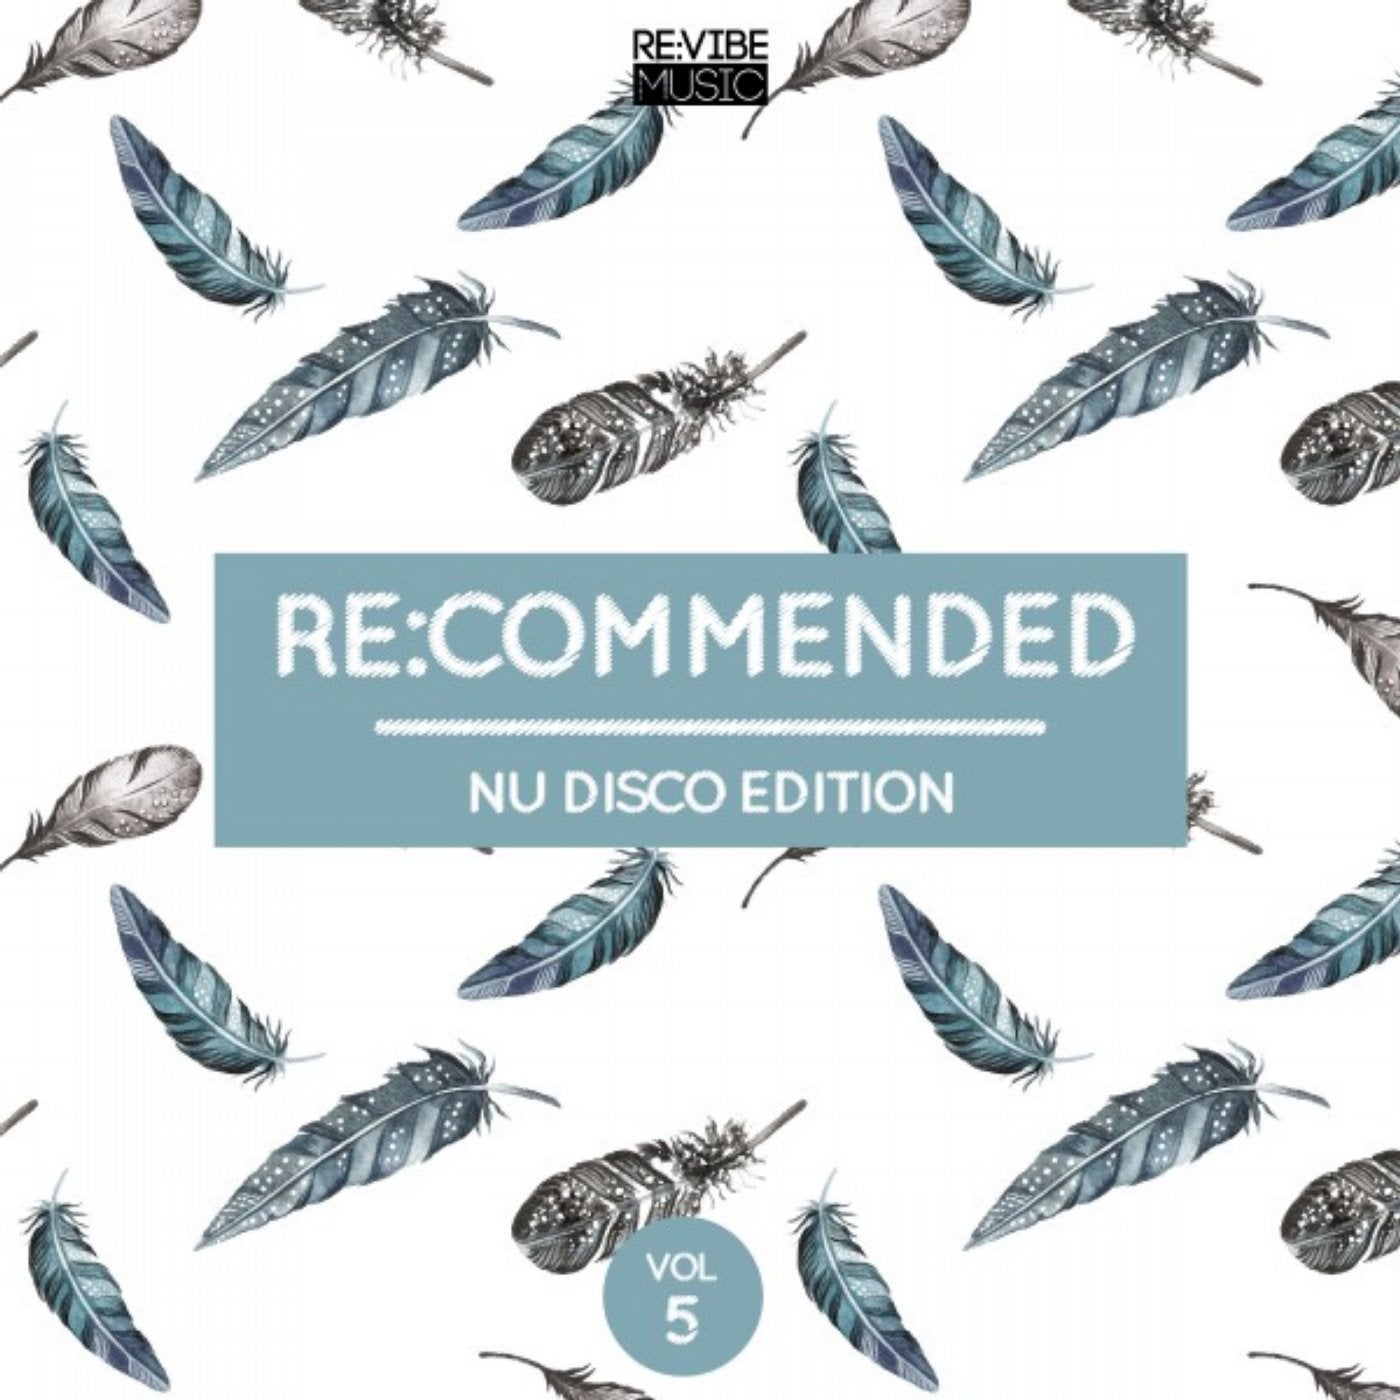 Re:Commended - Nu Disco Edition, Vol. 5